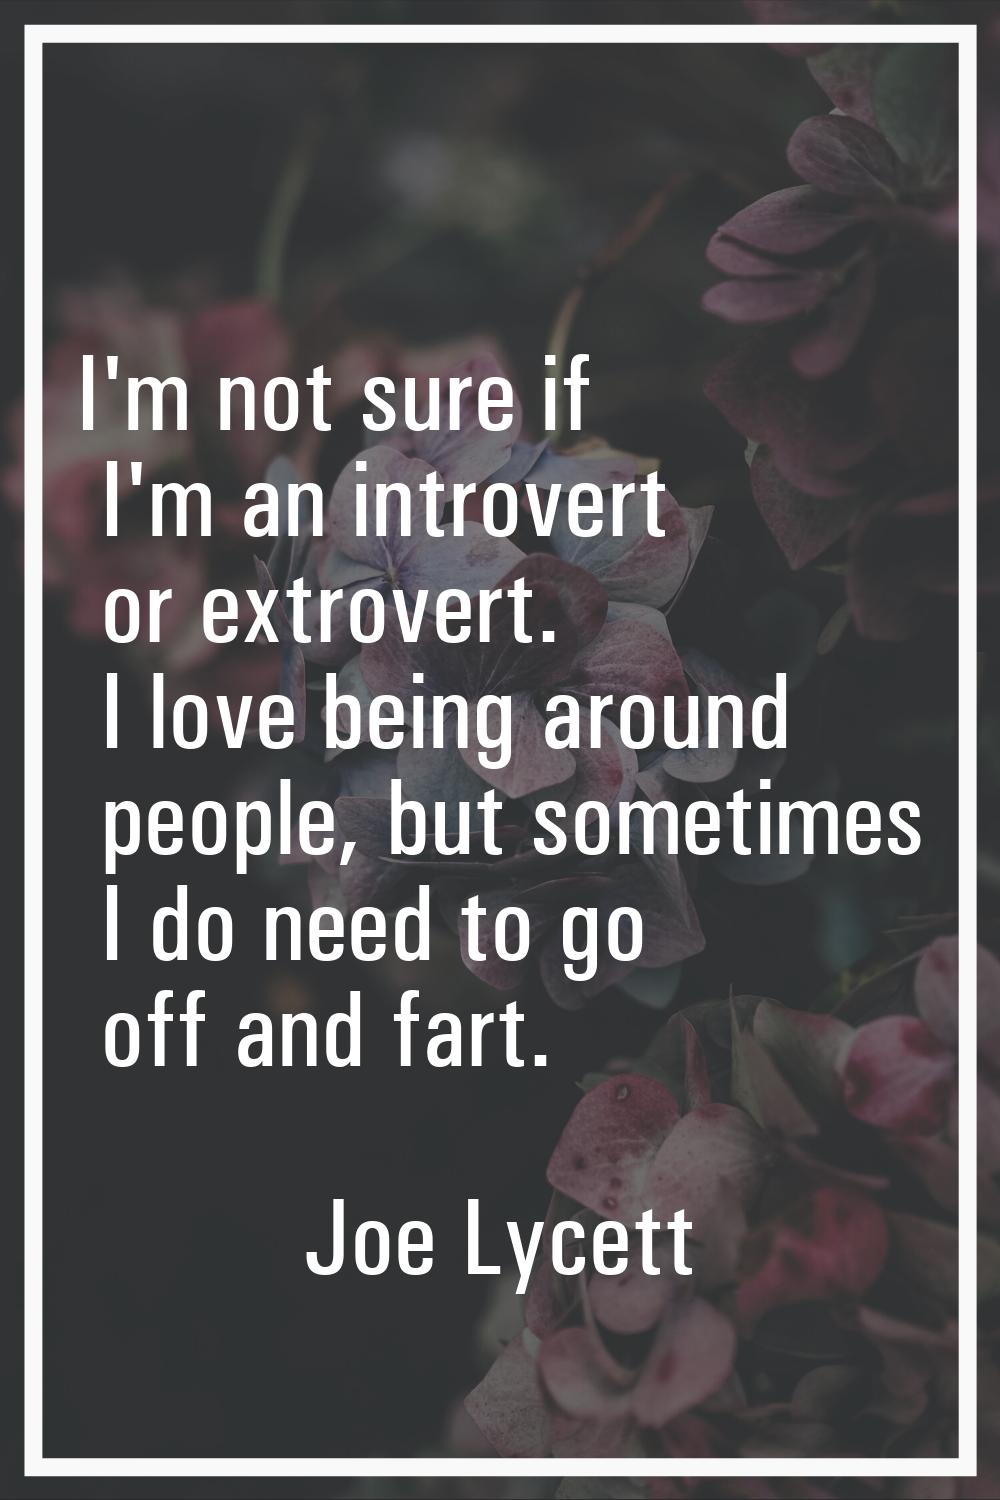 I'm not sure if I'm an introvert or extrovert. I love being around people, but sometimes I do need 